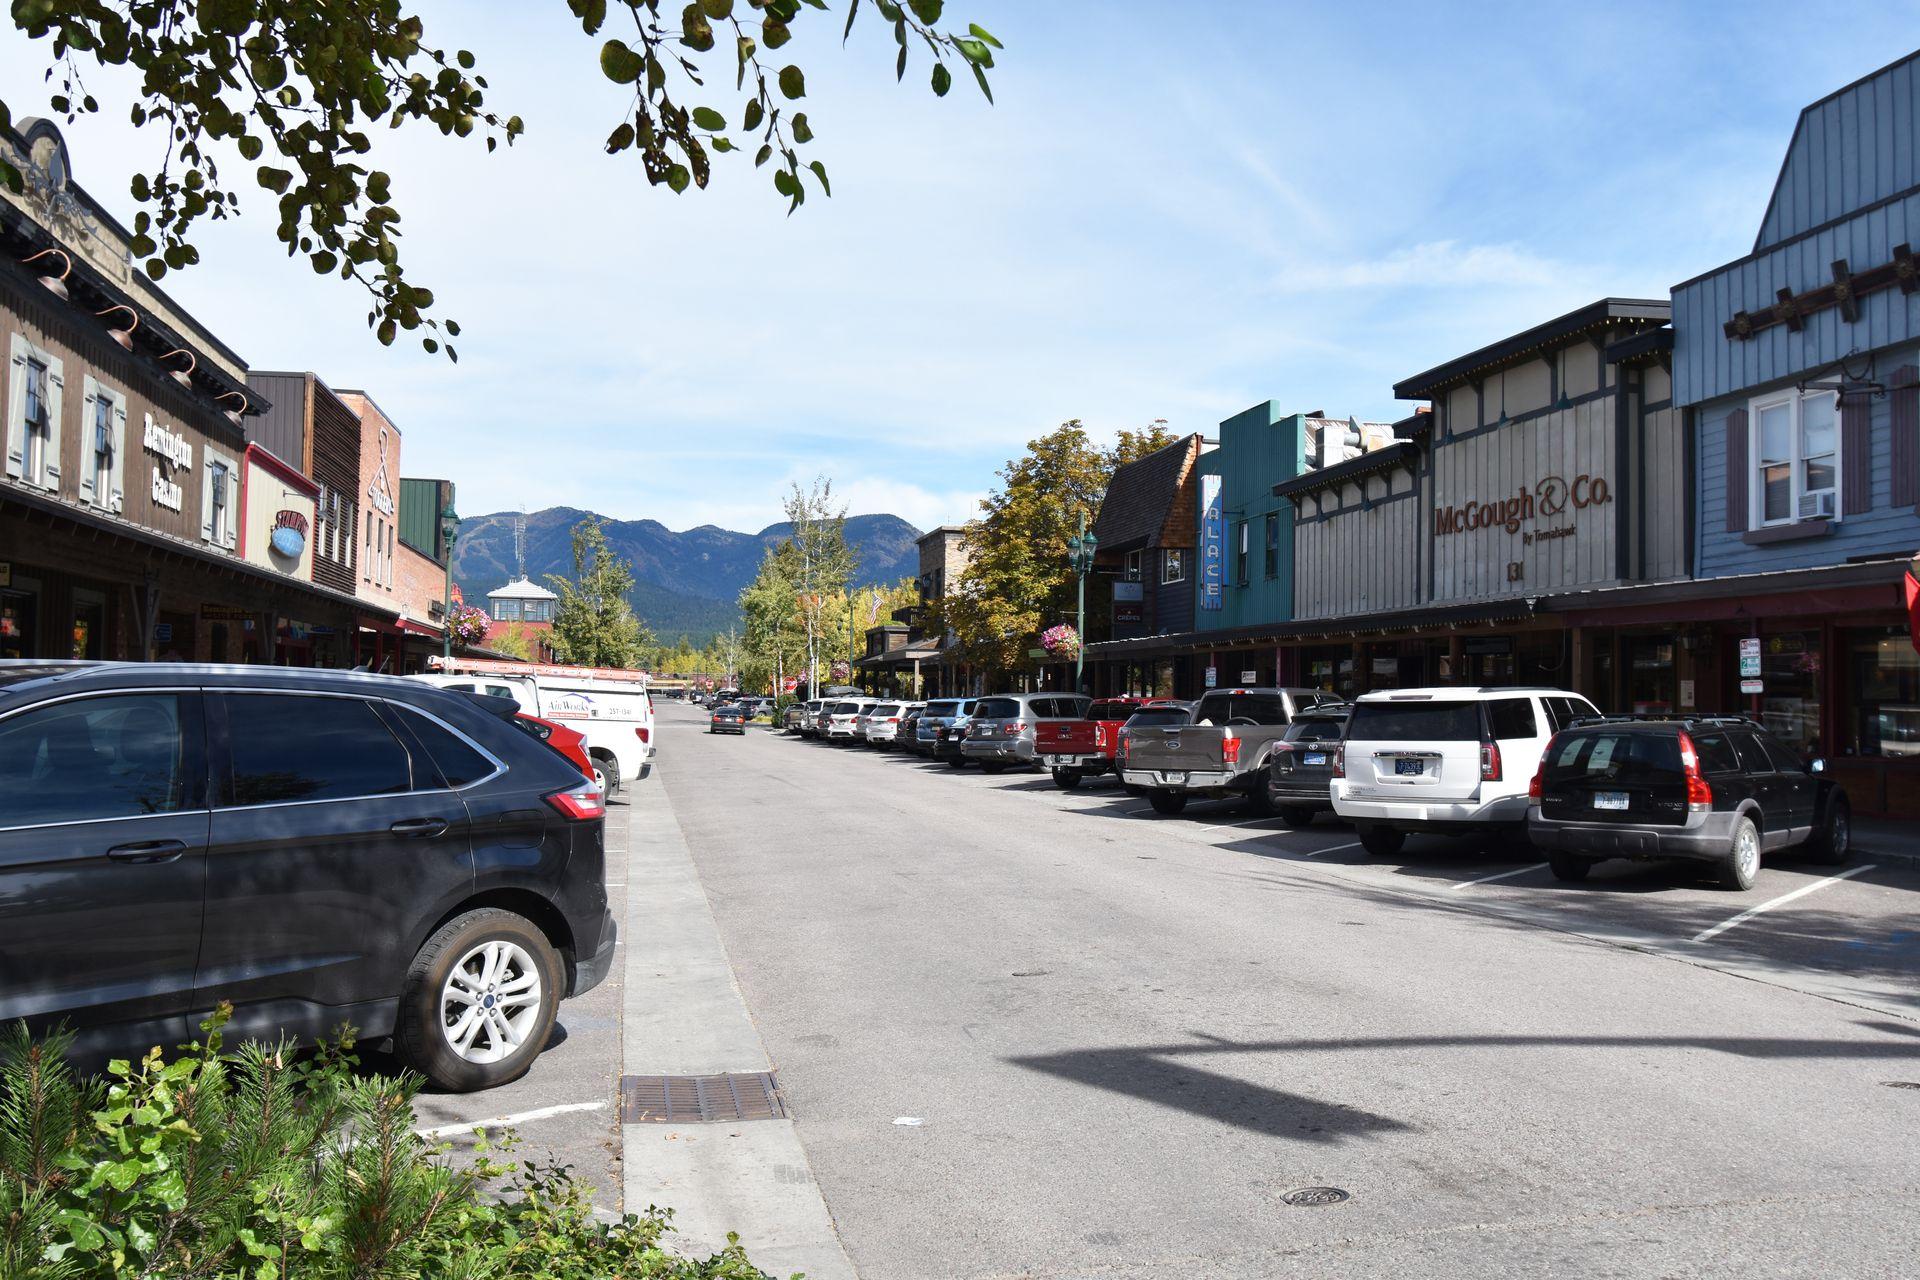 A street in Whitefish. There are shops on both side of the road and cars parking along the street.